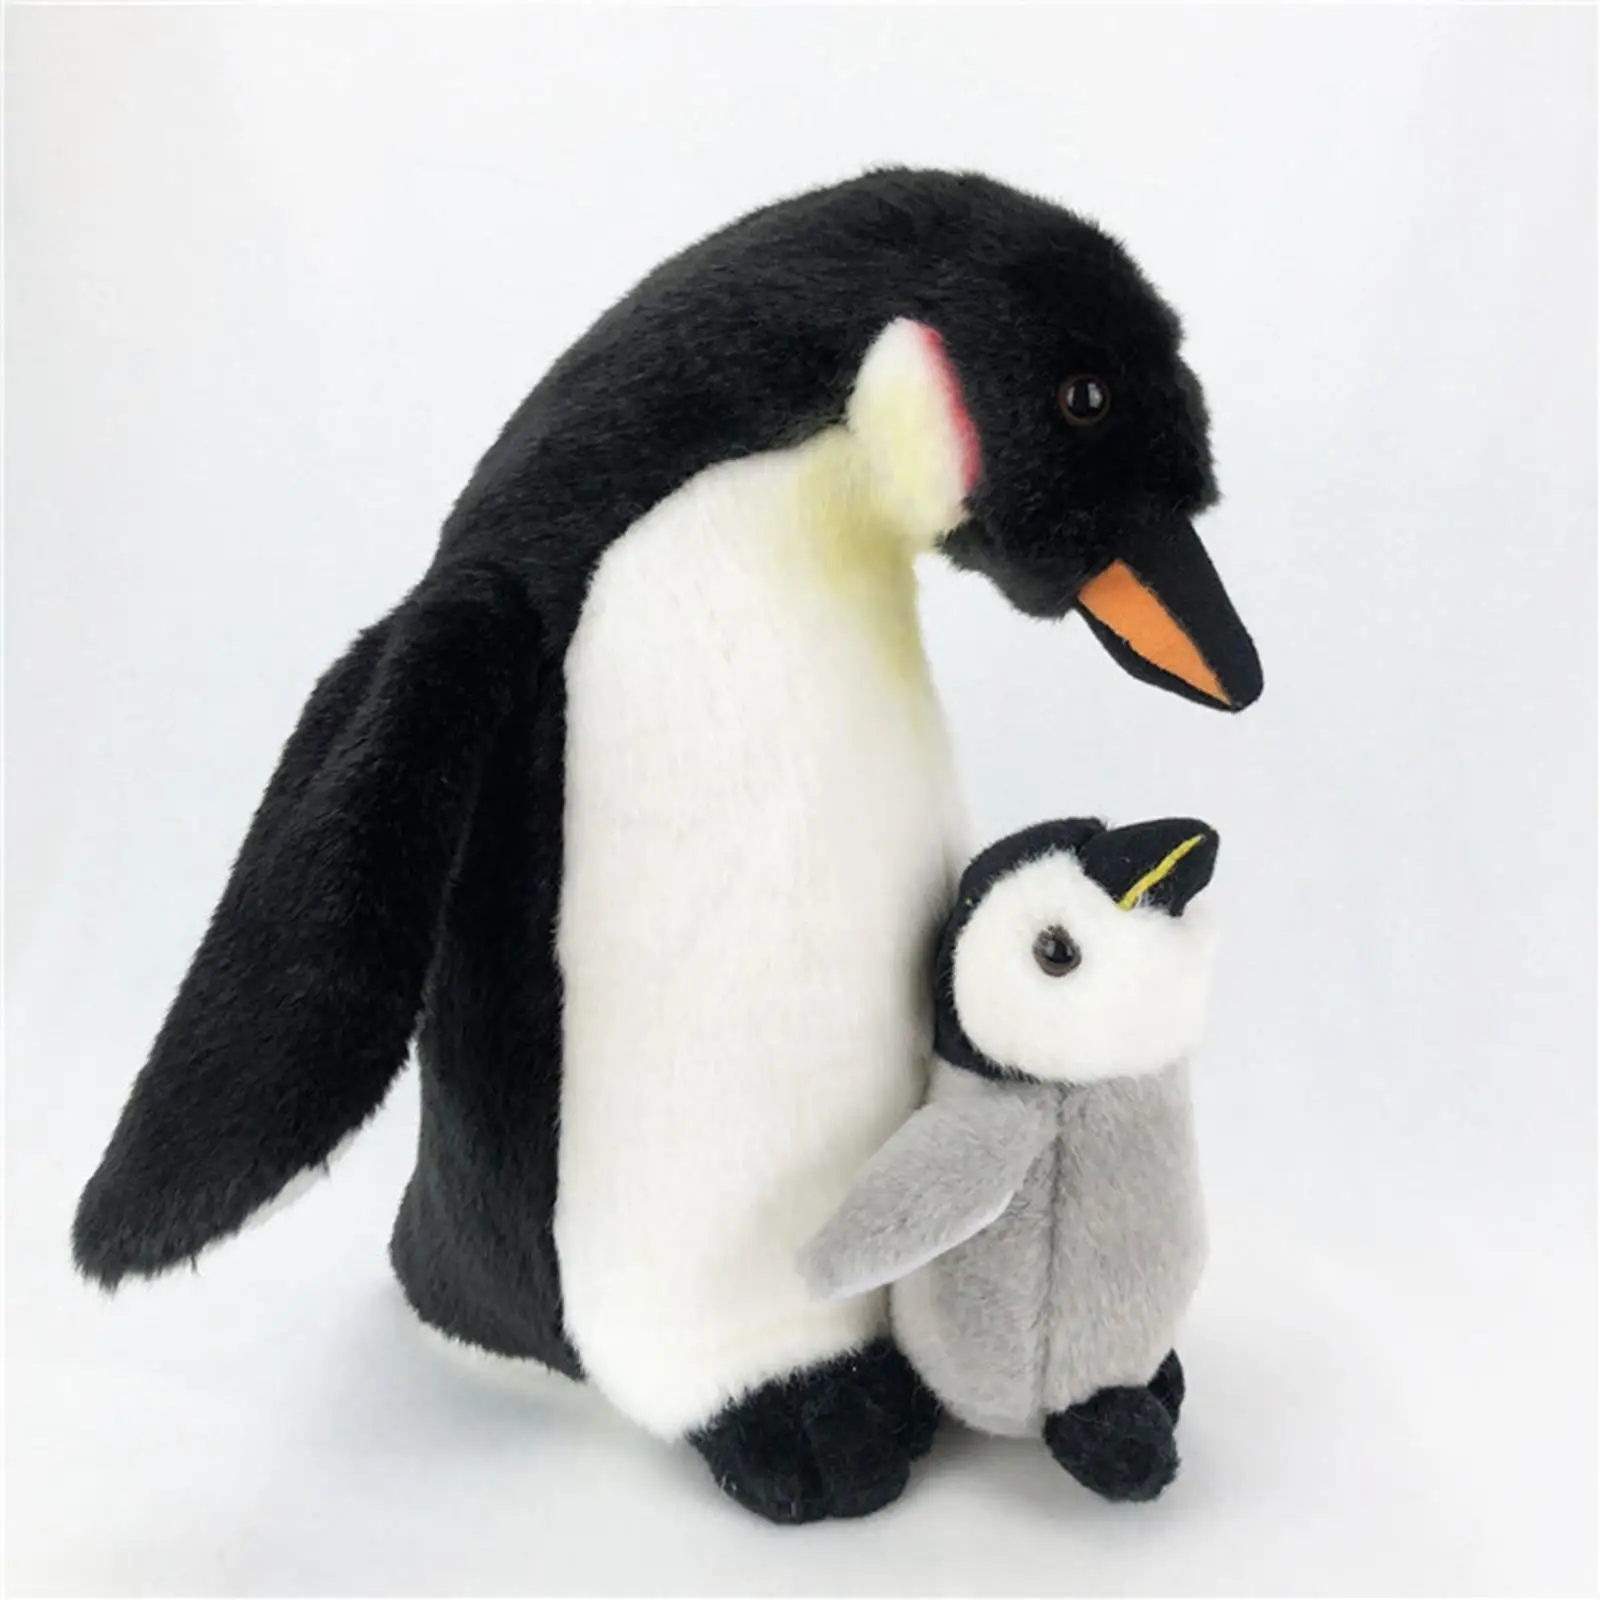 Penguin Plush Toy Educational Figurines Toys Gifts Comfortable Animal Toy for Girlfriend Boys Girls Christmas Bedtime Gifts Car